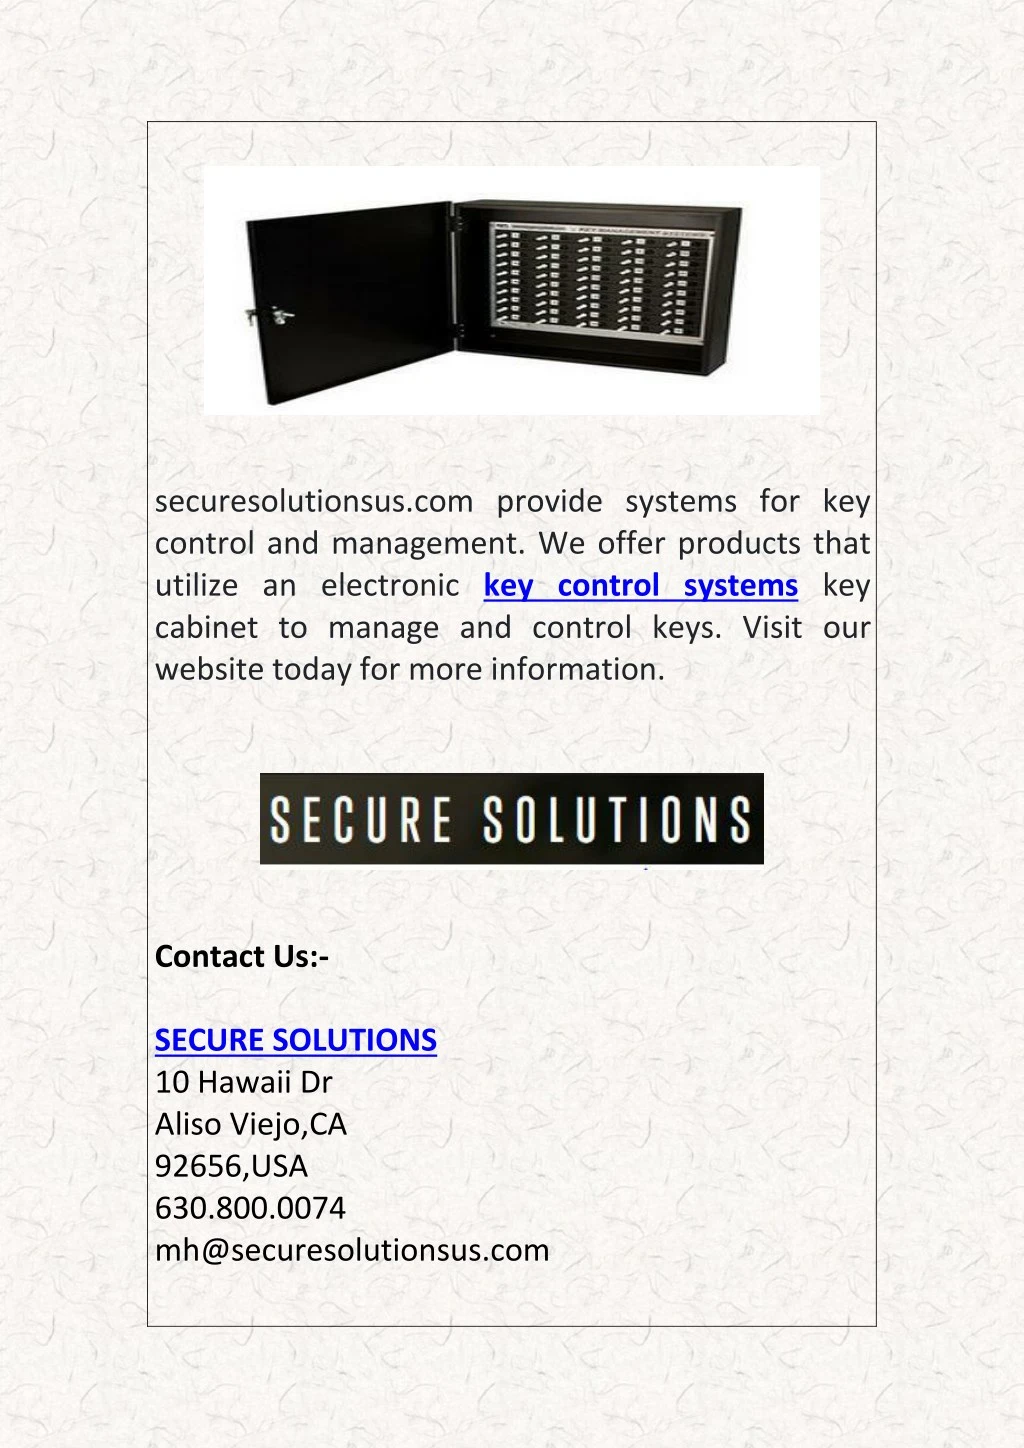 securesolutionsus com provide systems